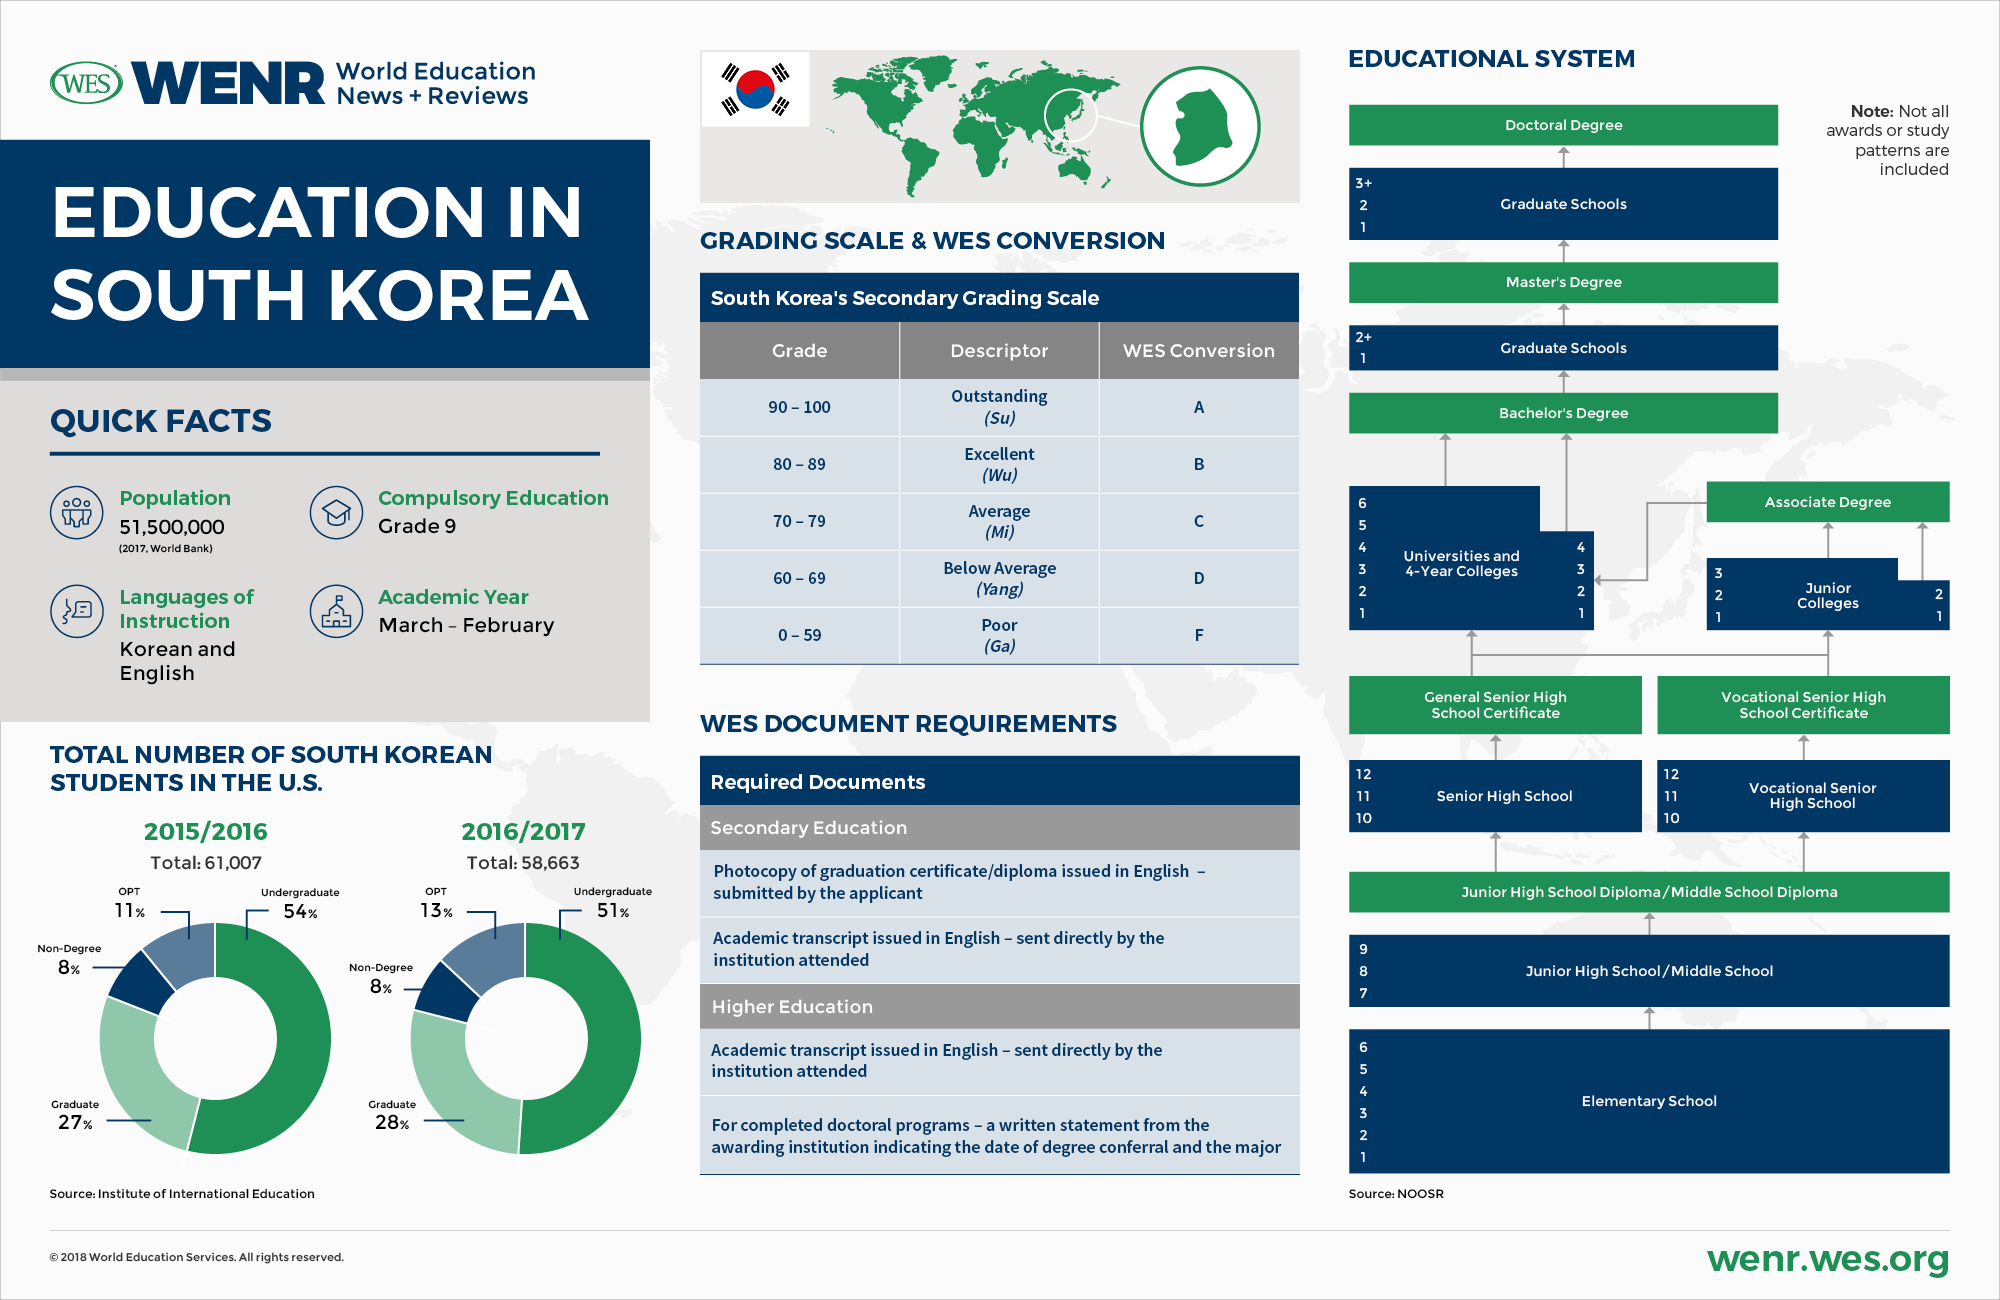 Education in South Korea Infographic: Fast facts on South Korea's educational system and international student mobility